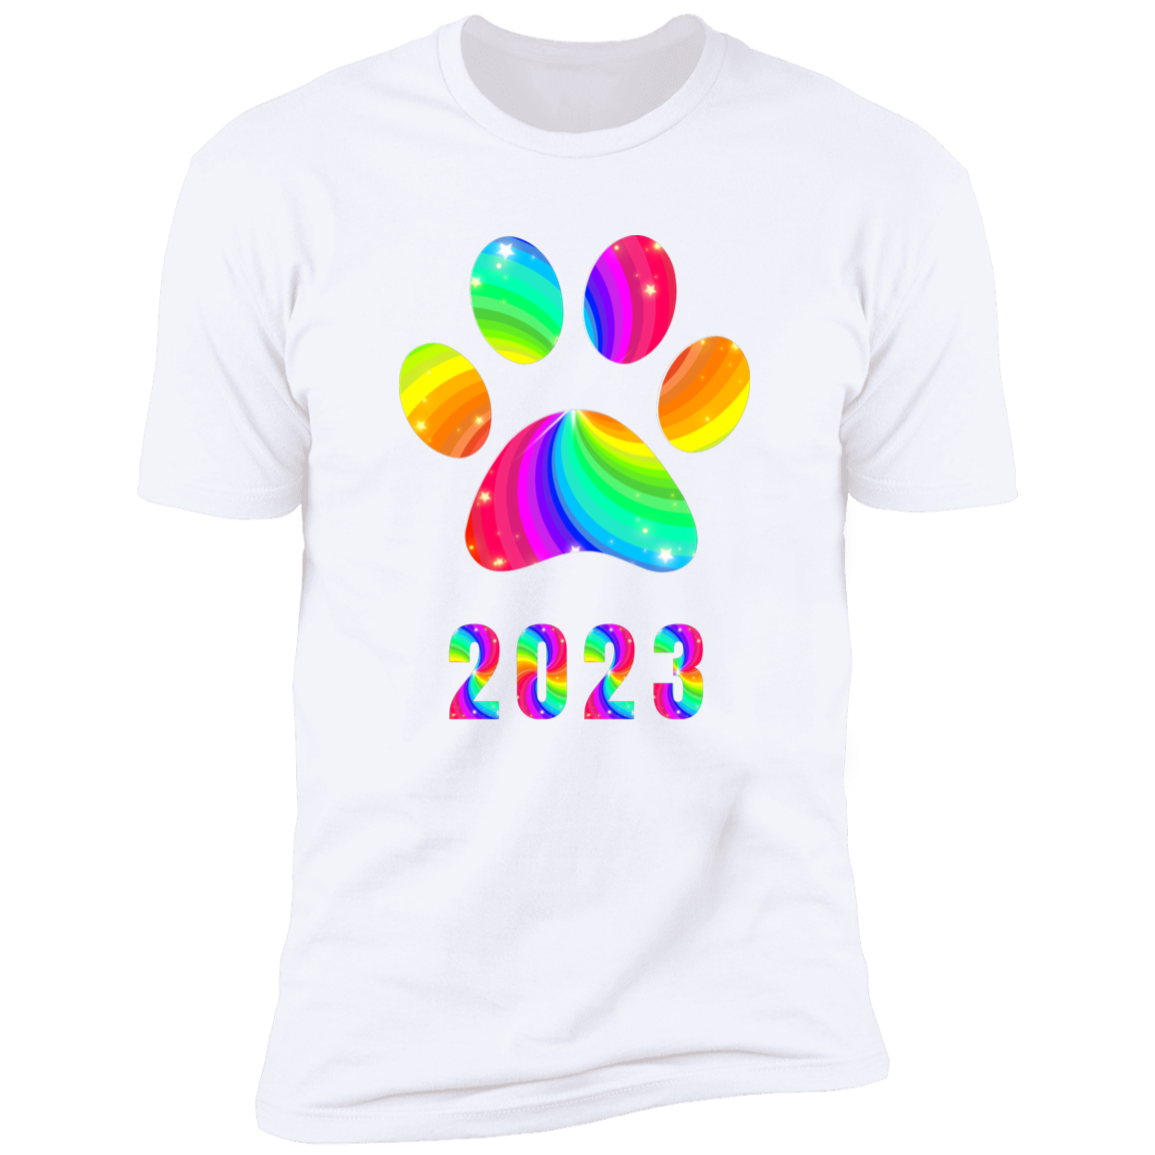 Pride Paw 2023 (Swirl) Pride T-shirt, Paw Pride Dog Shirt for humans, in white